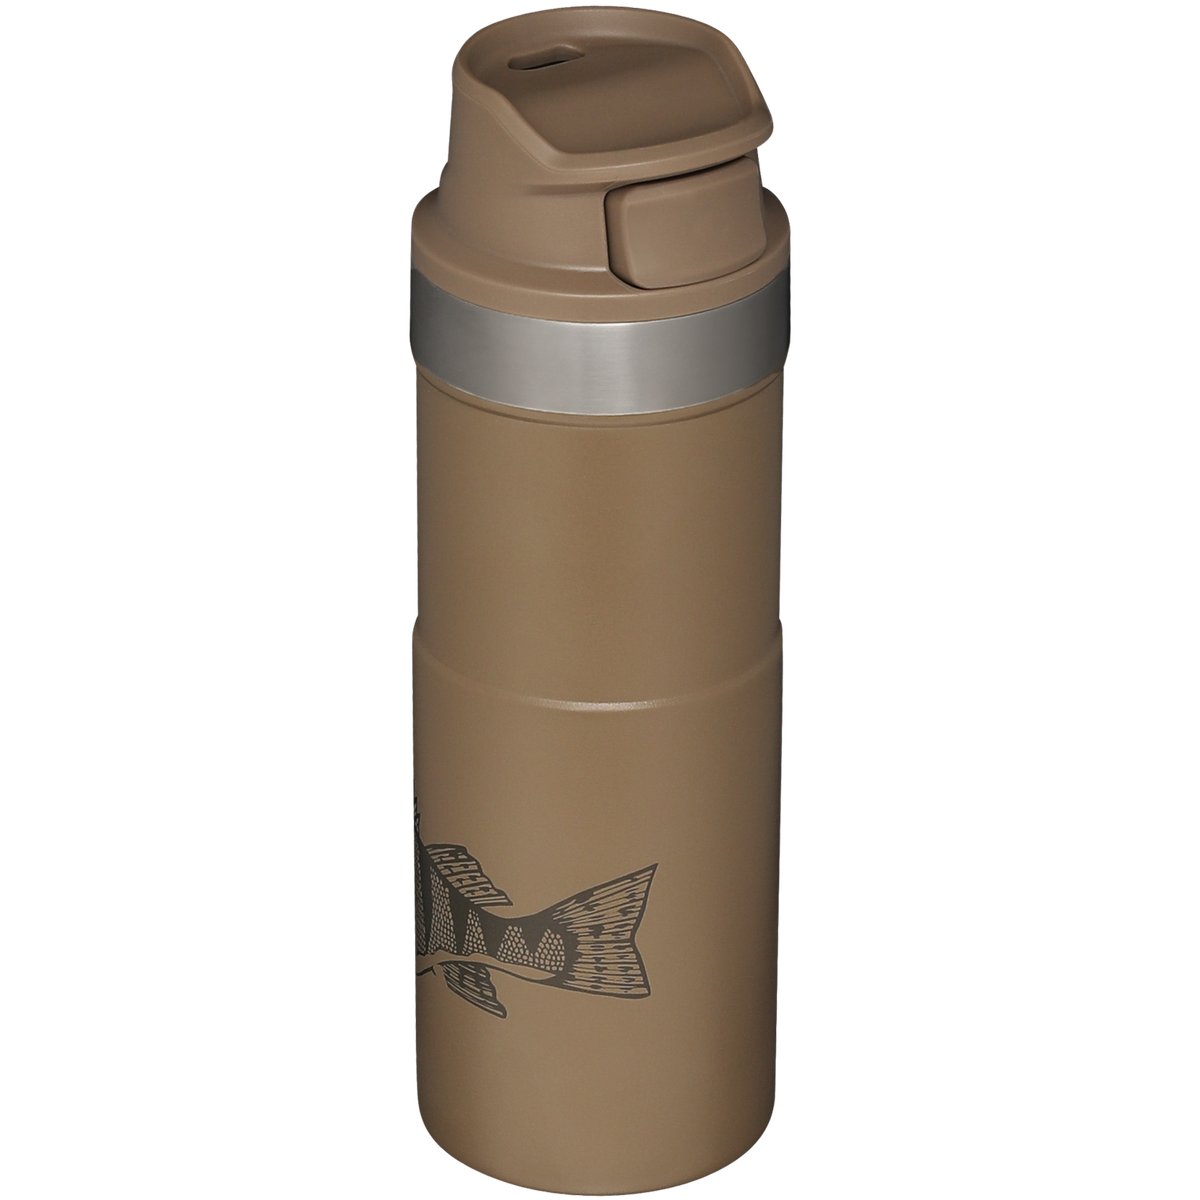 Stanley Classic Peter Perch Trigger-Action Travel Mug | Perch | 0.47L